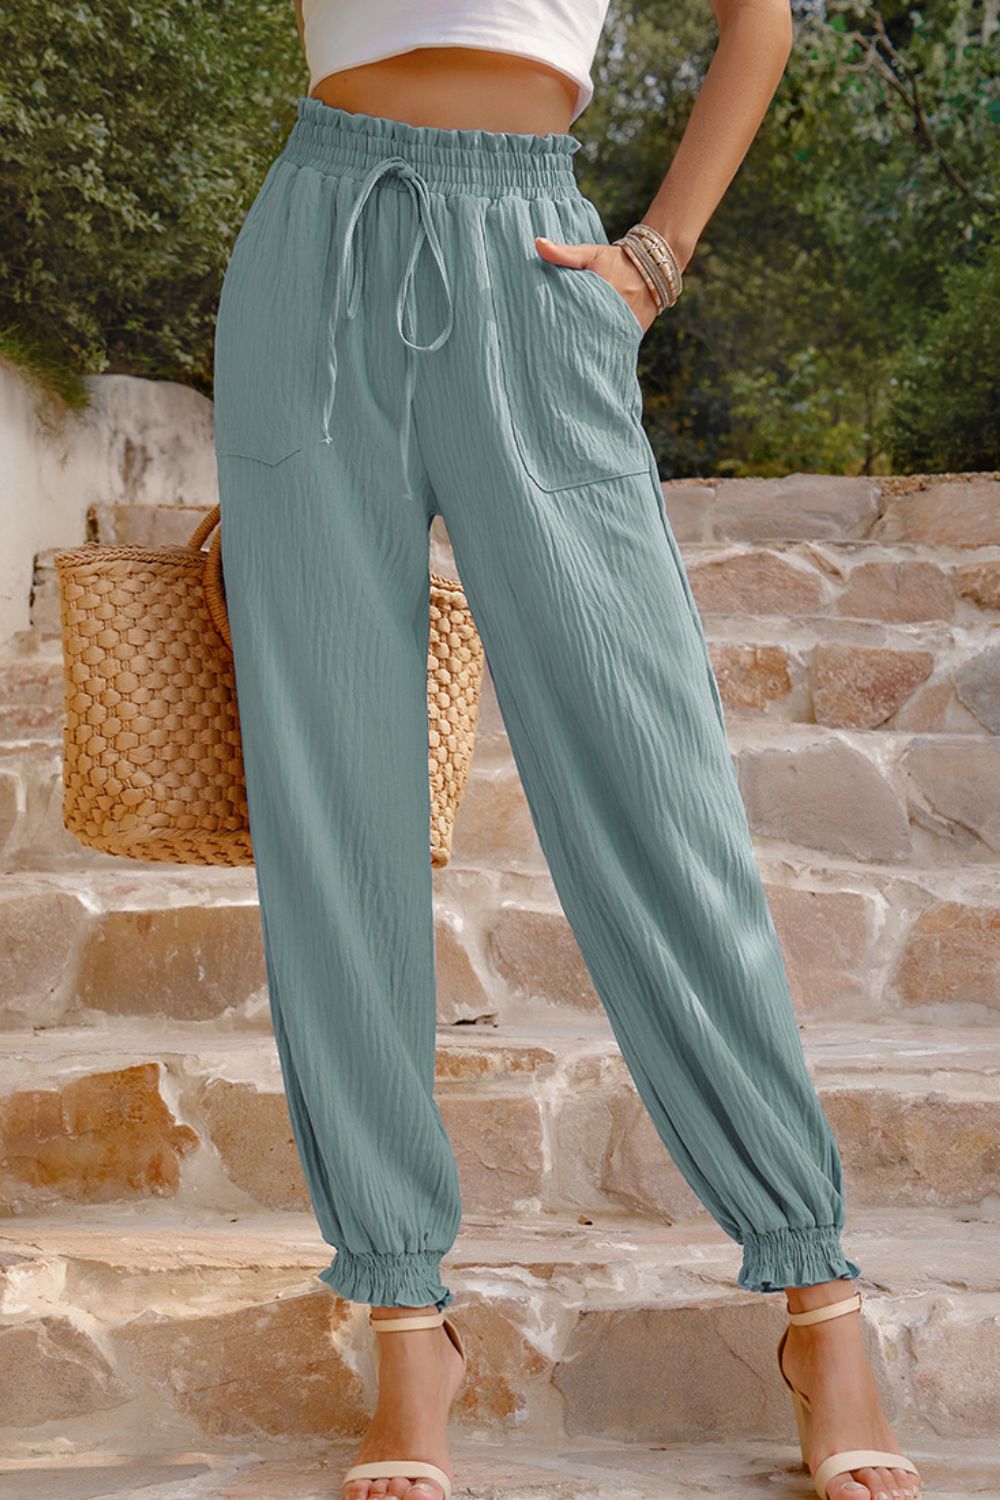 Textured Smocked Pants with Patch Pockets in Sage, Hunter Green, Ivory, and Blue